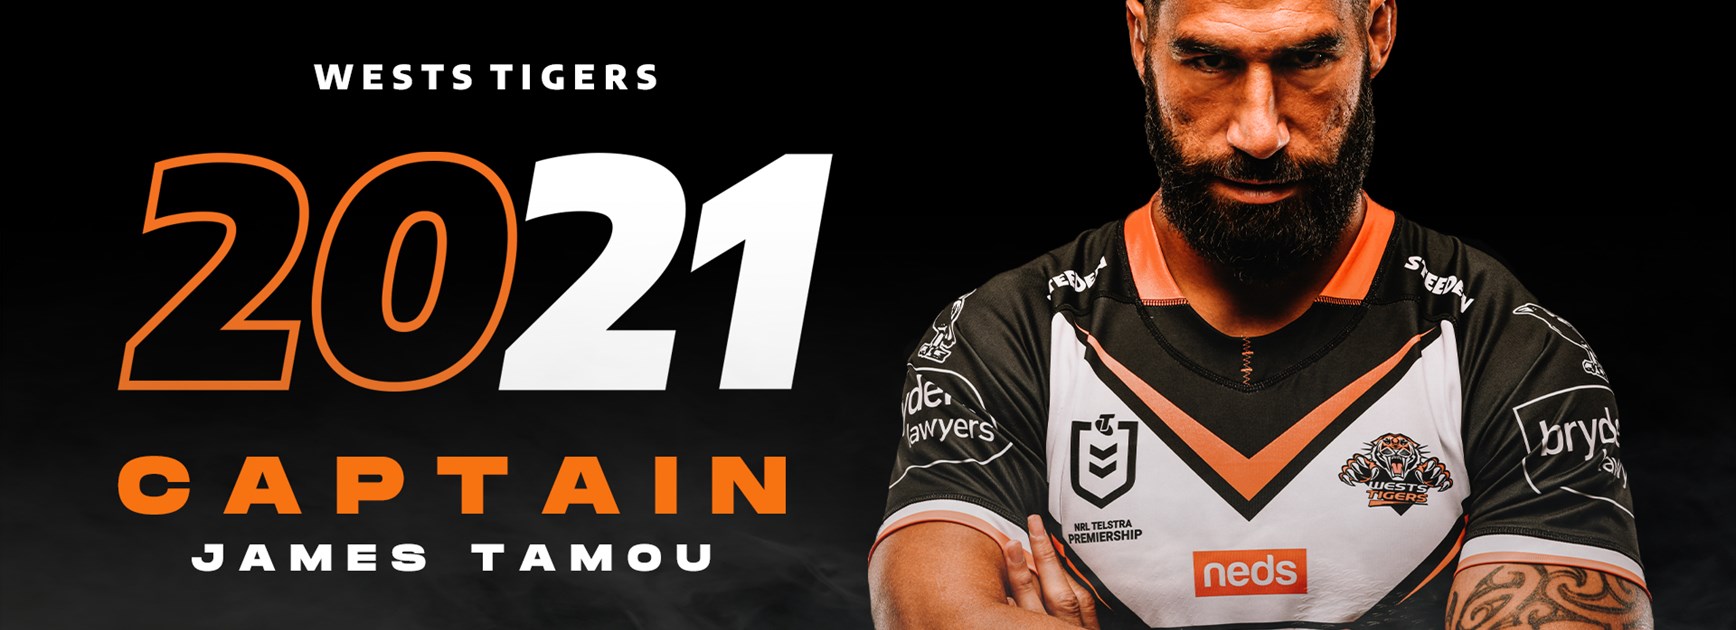 James Tamou named as Wests Tigers captain